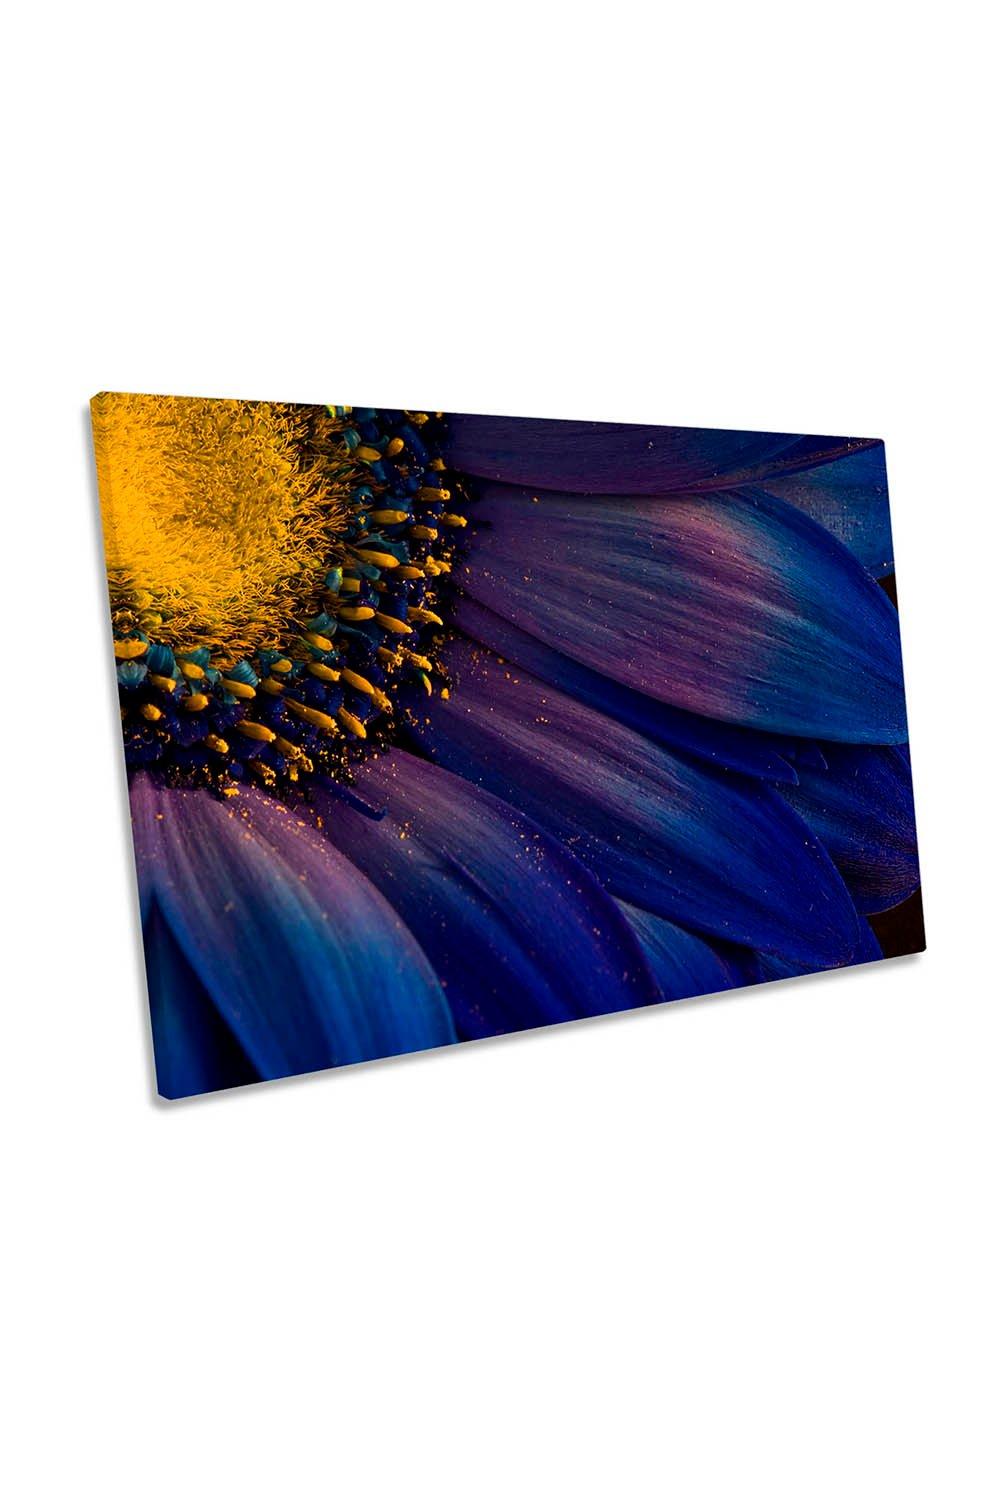 Blue Rays Flower Petal Floral Canvas Wall Art Picture Print